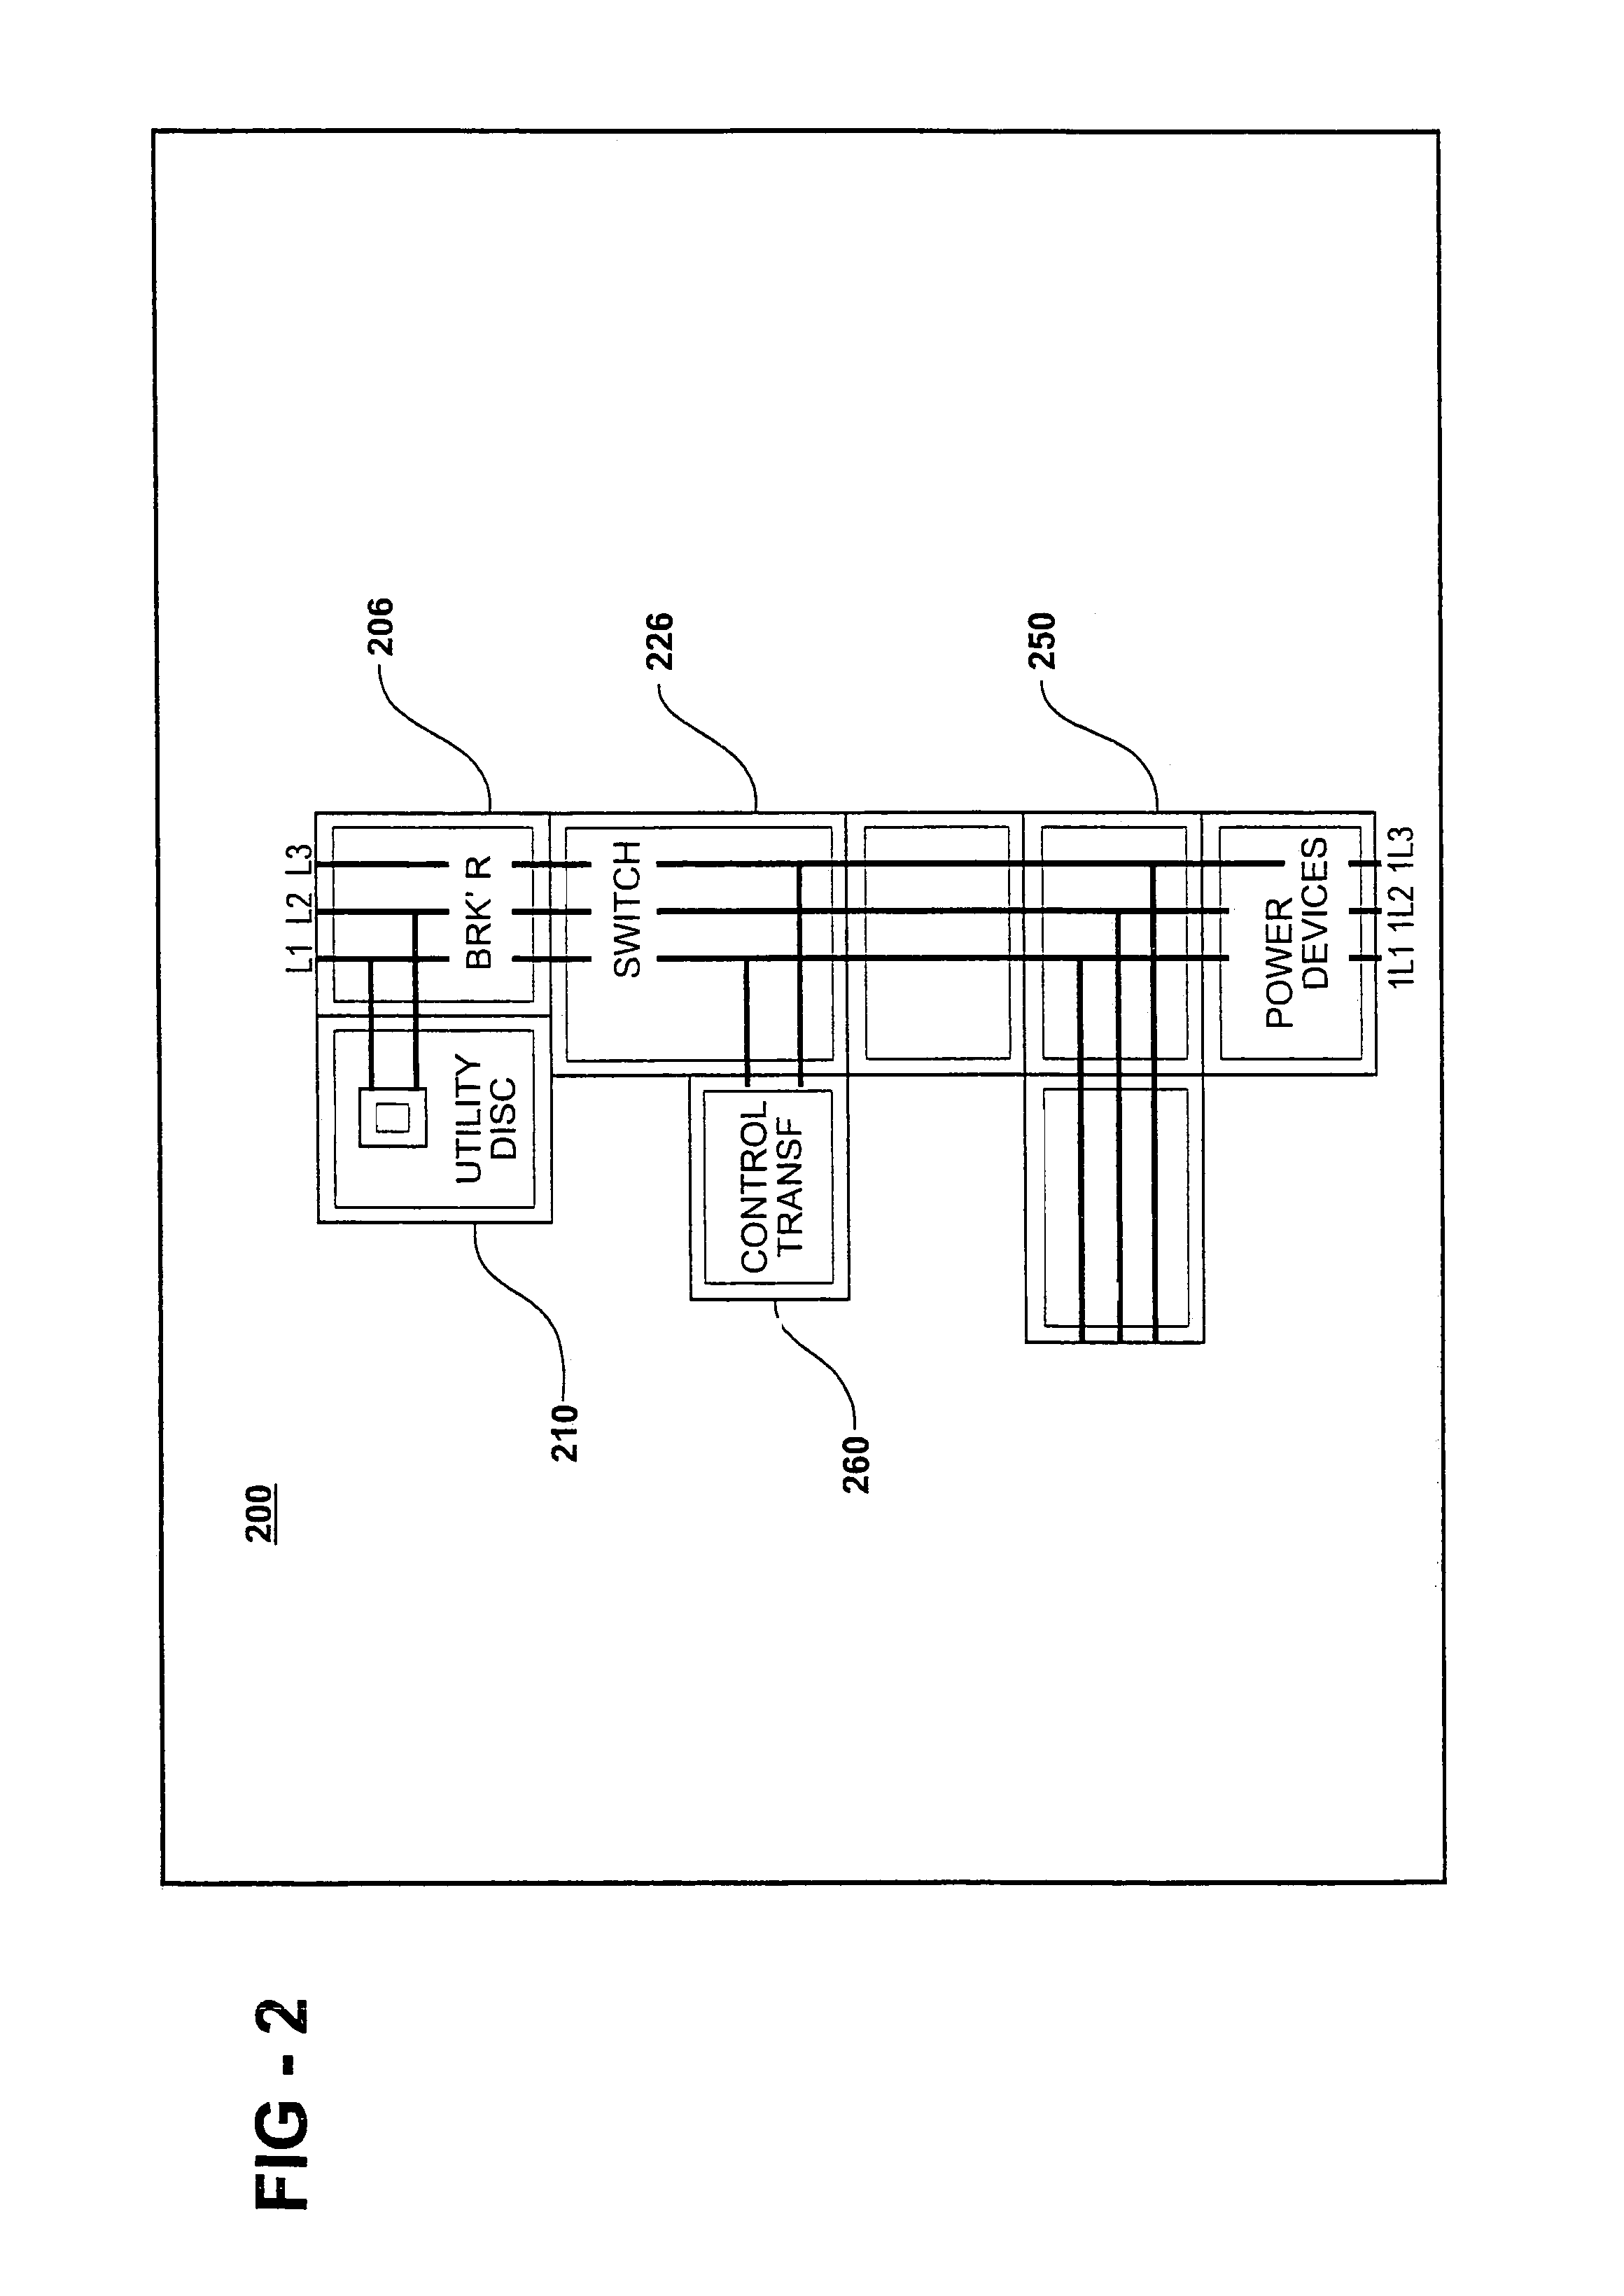 Electrical panel access and control apparatus including true emergency stop and power buss lockout